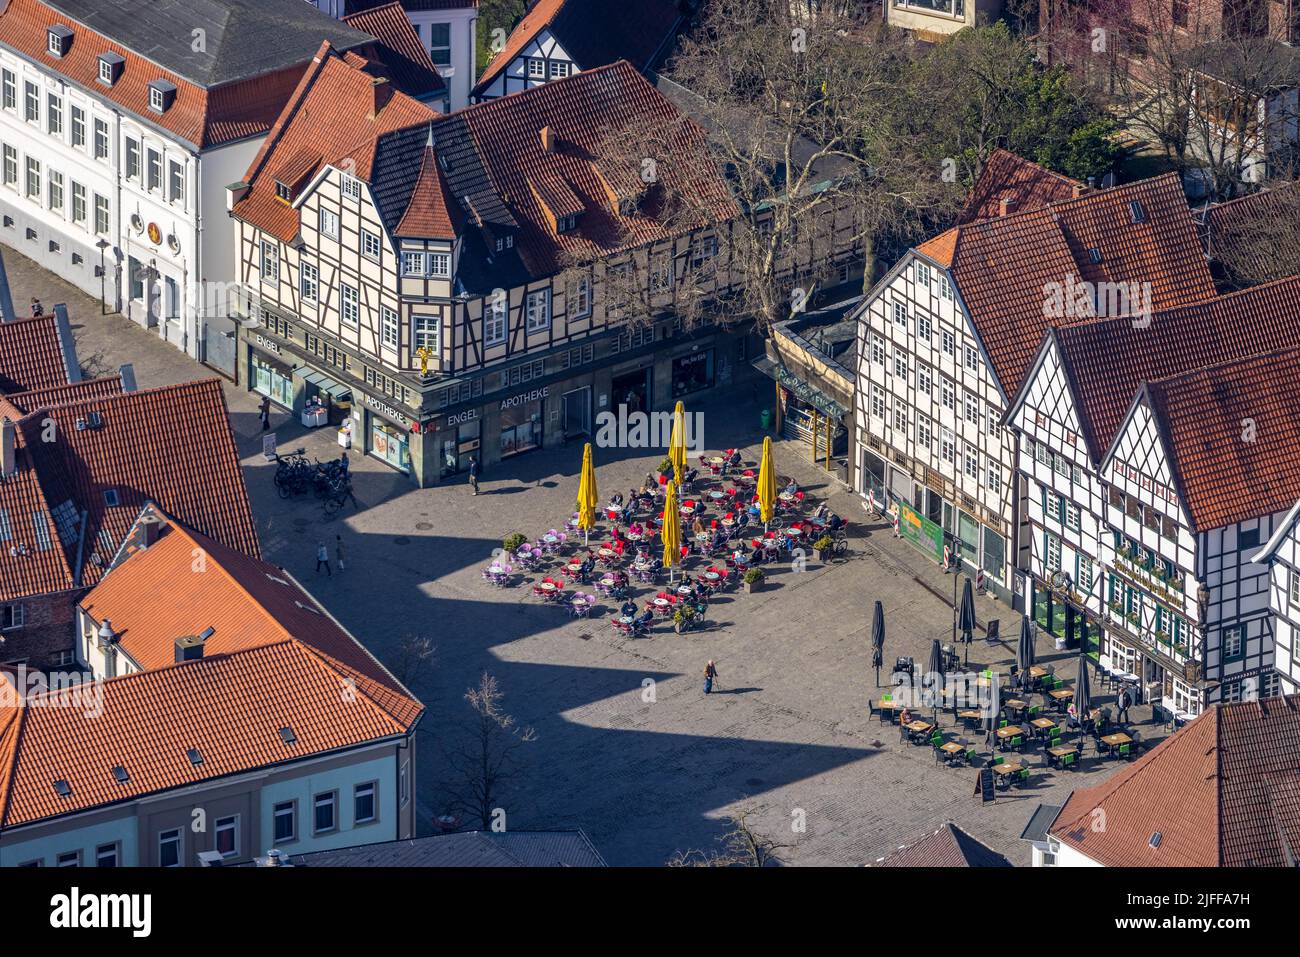 Aerial view, market place Soest with outdoor gastronomy and half-timbered houses, Soest, Soester Börde, North Rhine-Westphalia, Germany, outdoor gastr Stock Photo